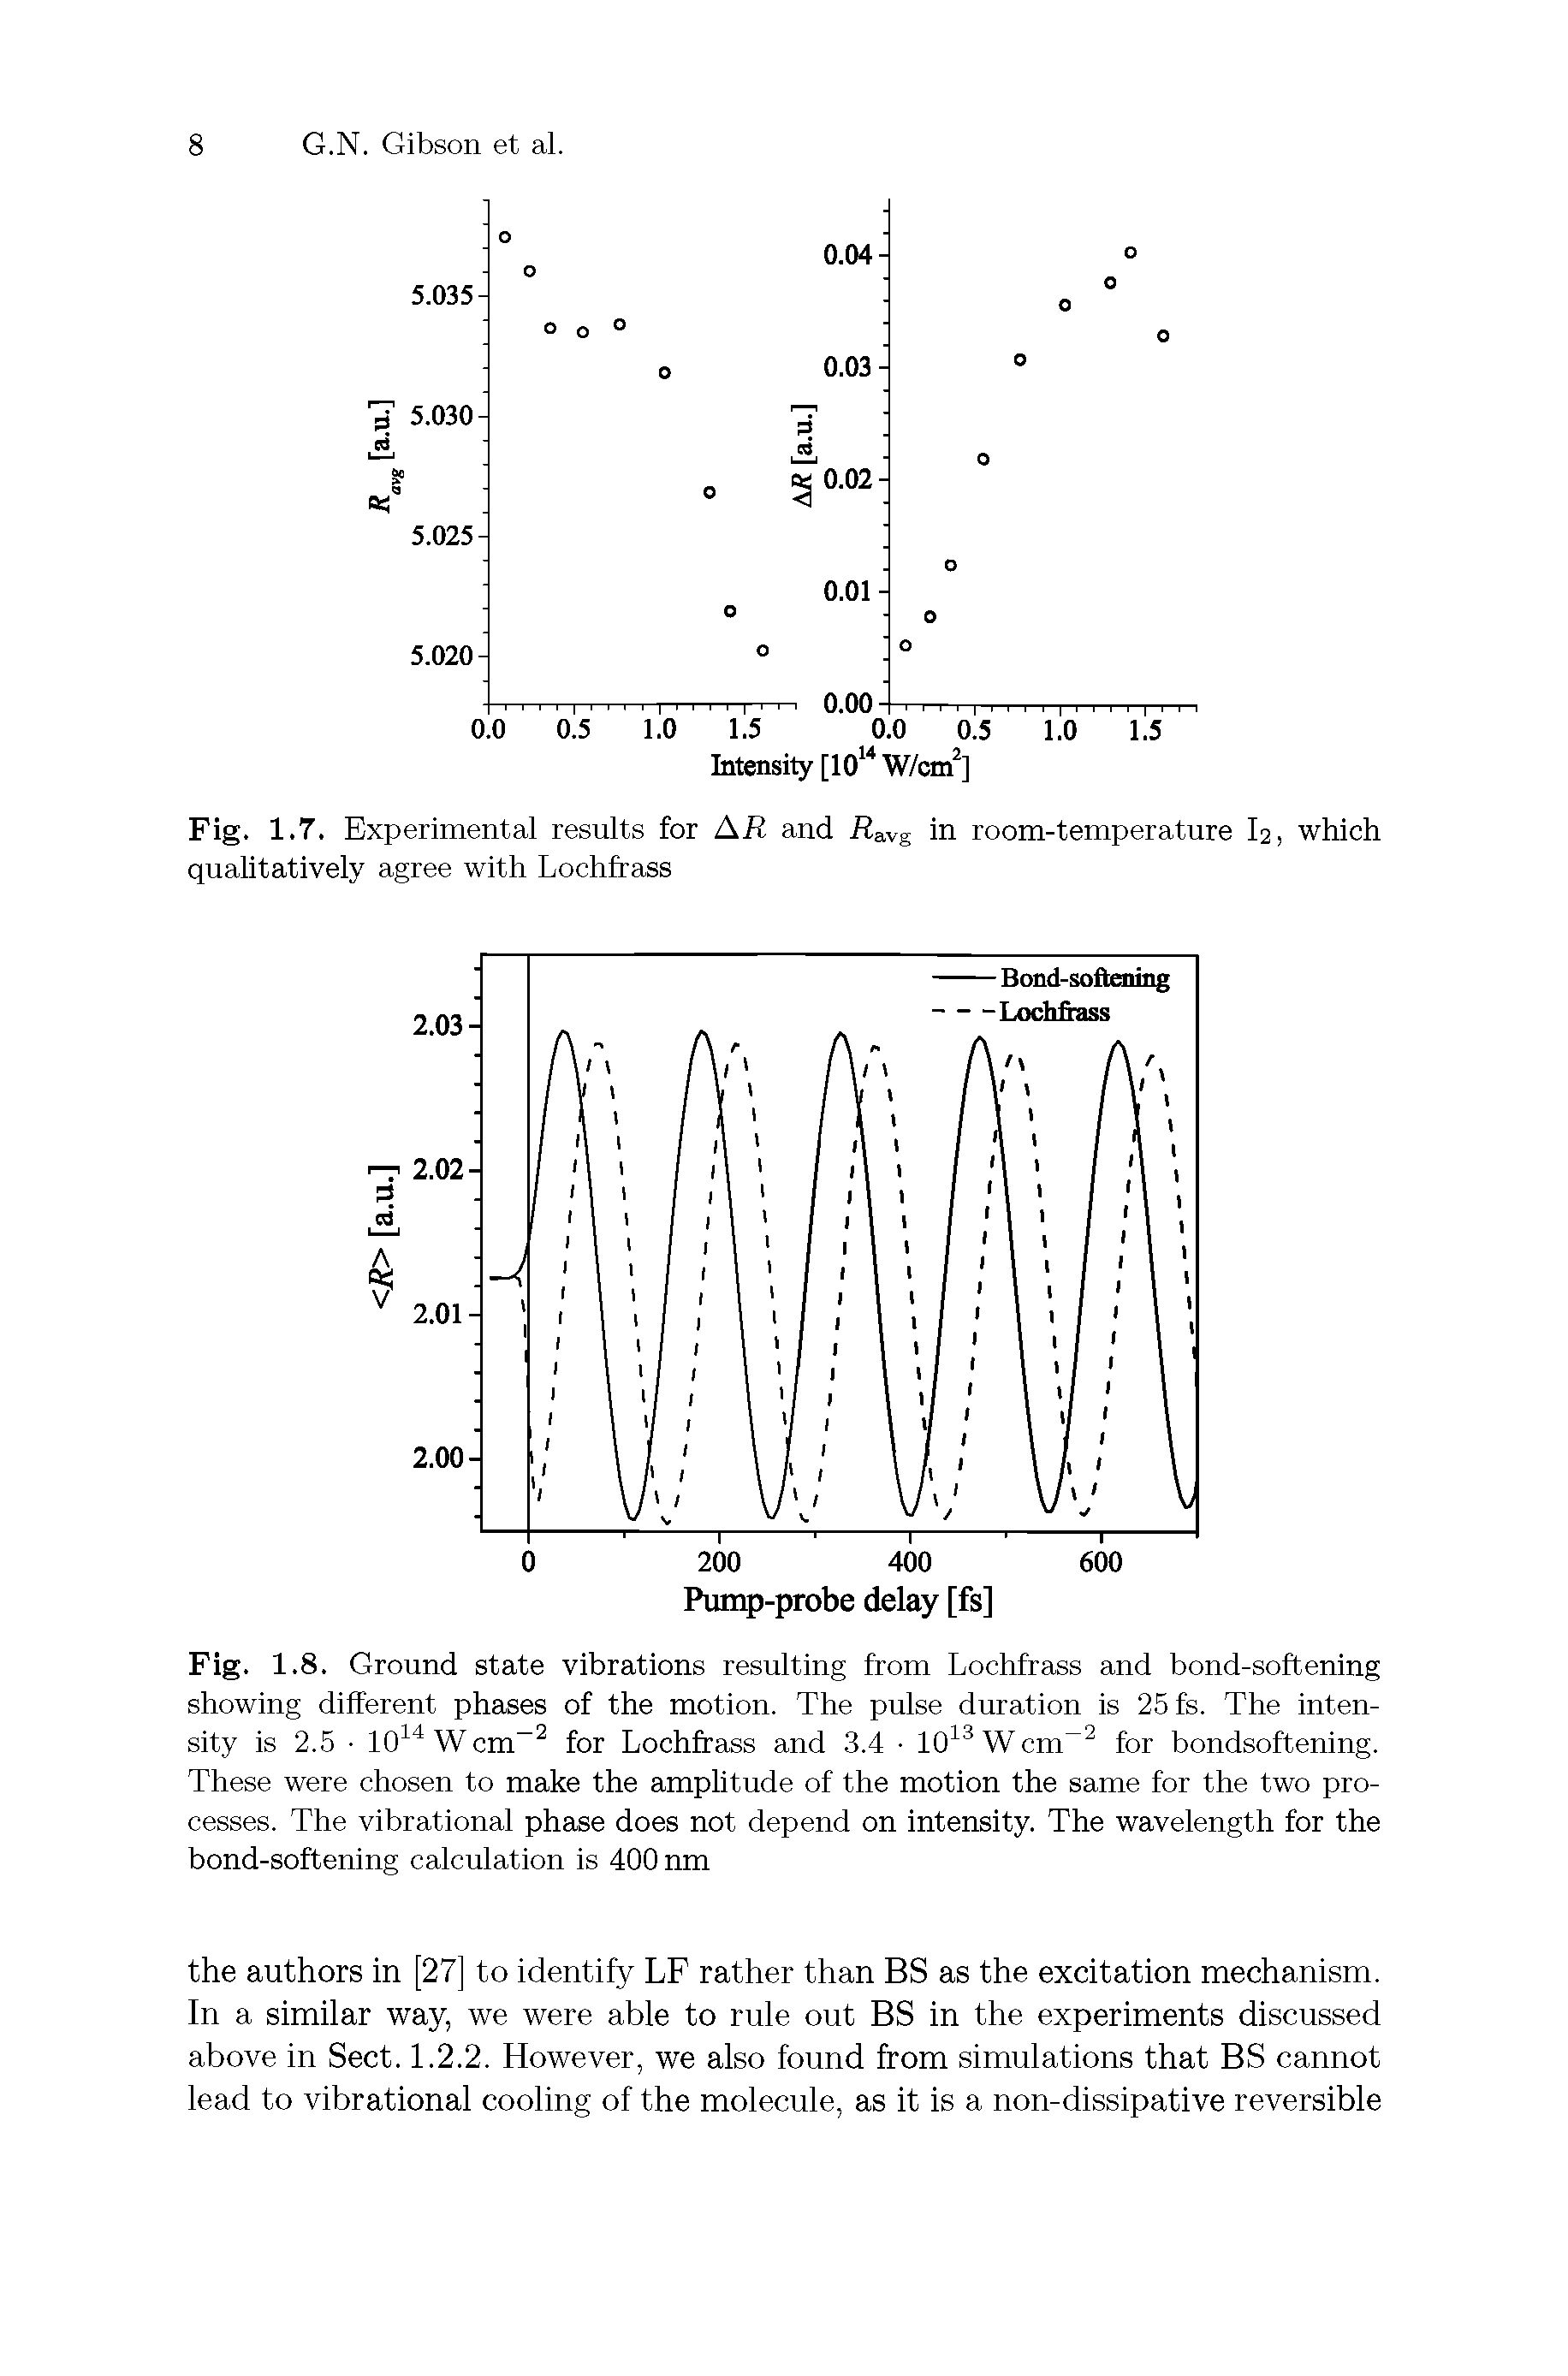 Fig. 1.8. Ground state vibrations resulting from Lochfrass and bond-softening showing different phases of the motion. The pulse duration is 25 fs. The intensity is 2.5 1014Wcm-2 for Lochfrass and 3.4 1013Wcm 2 for bondsoftening. These were chosen to make the amplitude of the motion the same for the two processes. The vibrational phase does not depend on intensity. The wavelength for the bond-softening calculation is 400 nm...